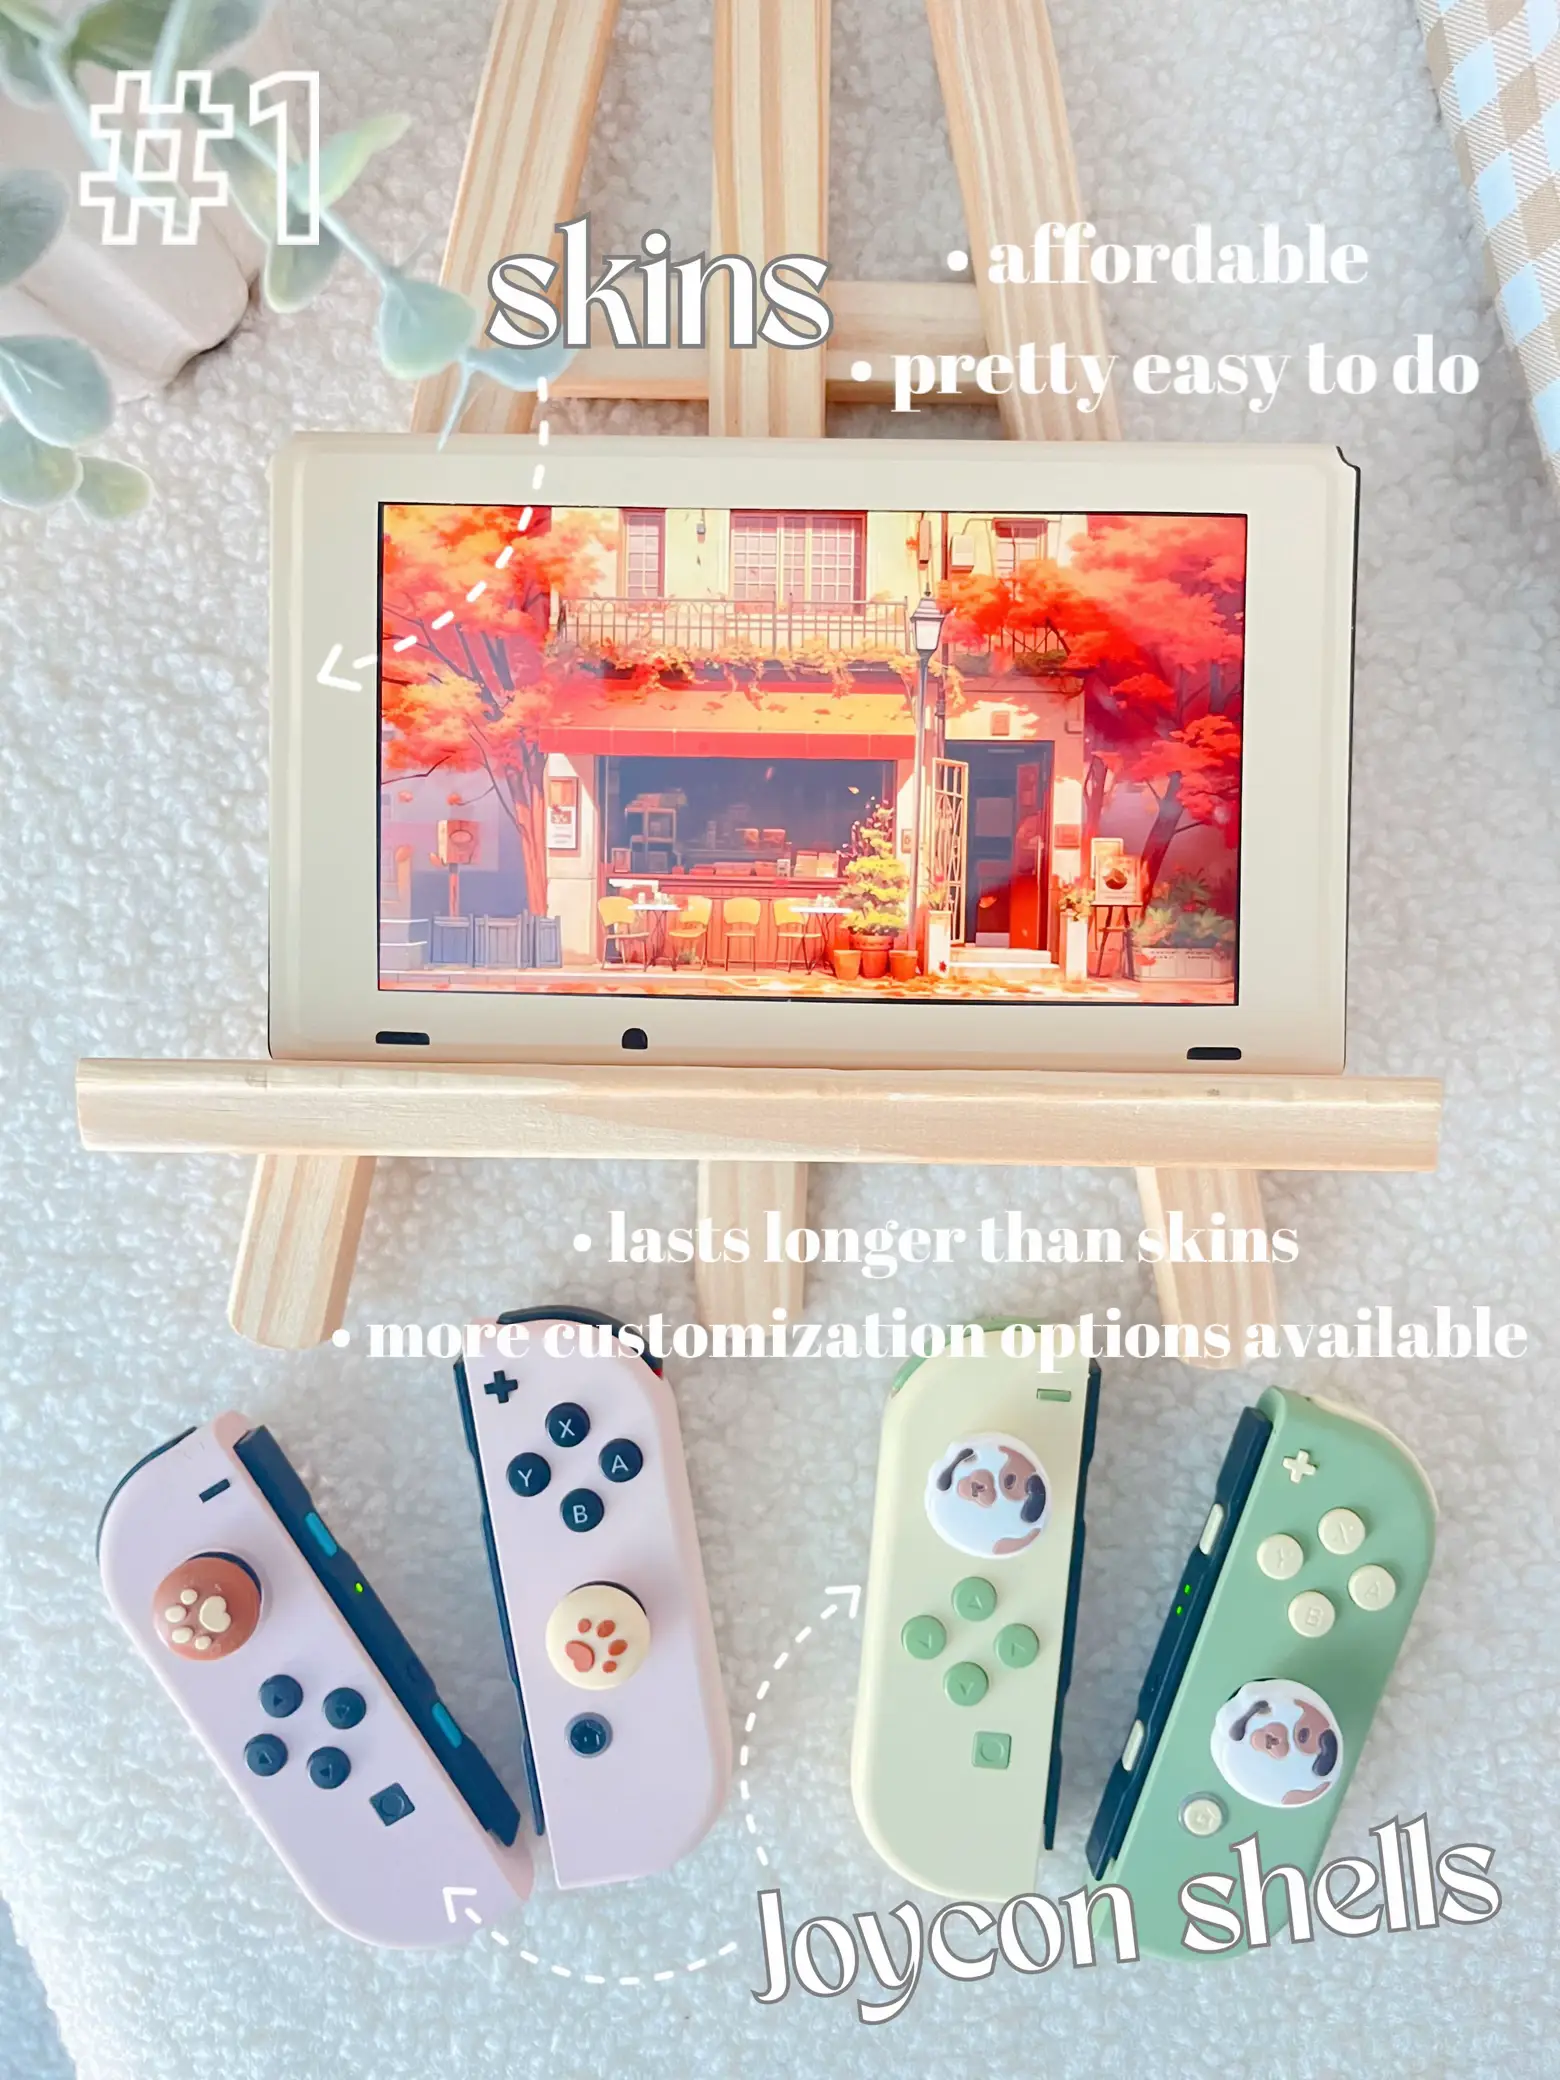 Disney Stitch Skin Cute Full Cover Sticker Decal for Switch OLED Console  Joy-con Controller Dock Skin Vinyl Protective Film